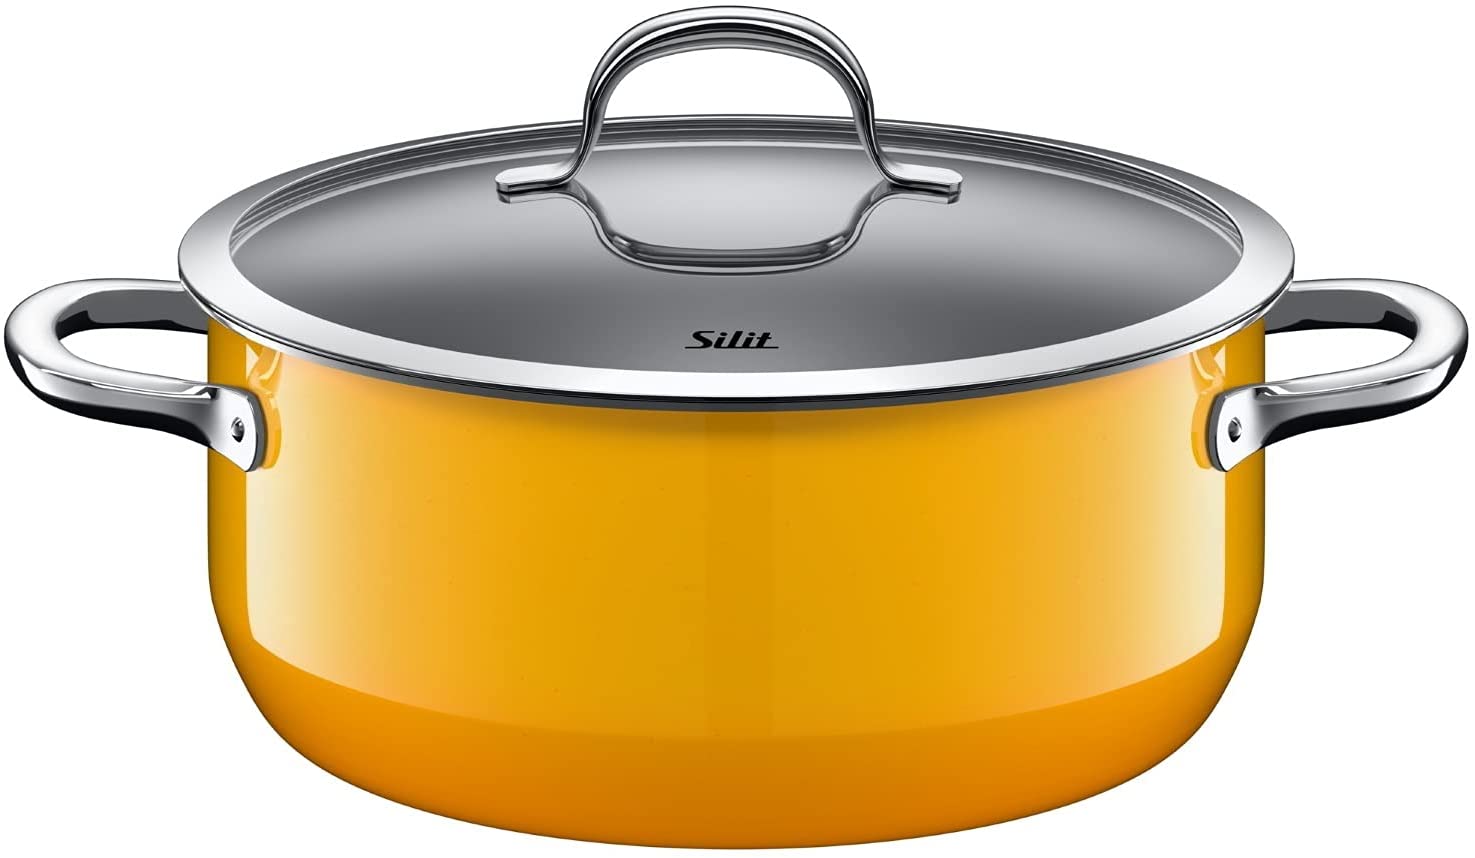 Silit Passion Yellow Saucepan with Glass Lid Diameter 24 cm Silargan Functional Ceramic Pouring Rim Suitable for Induction Cookers 4.4 L